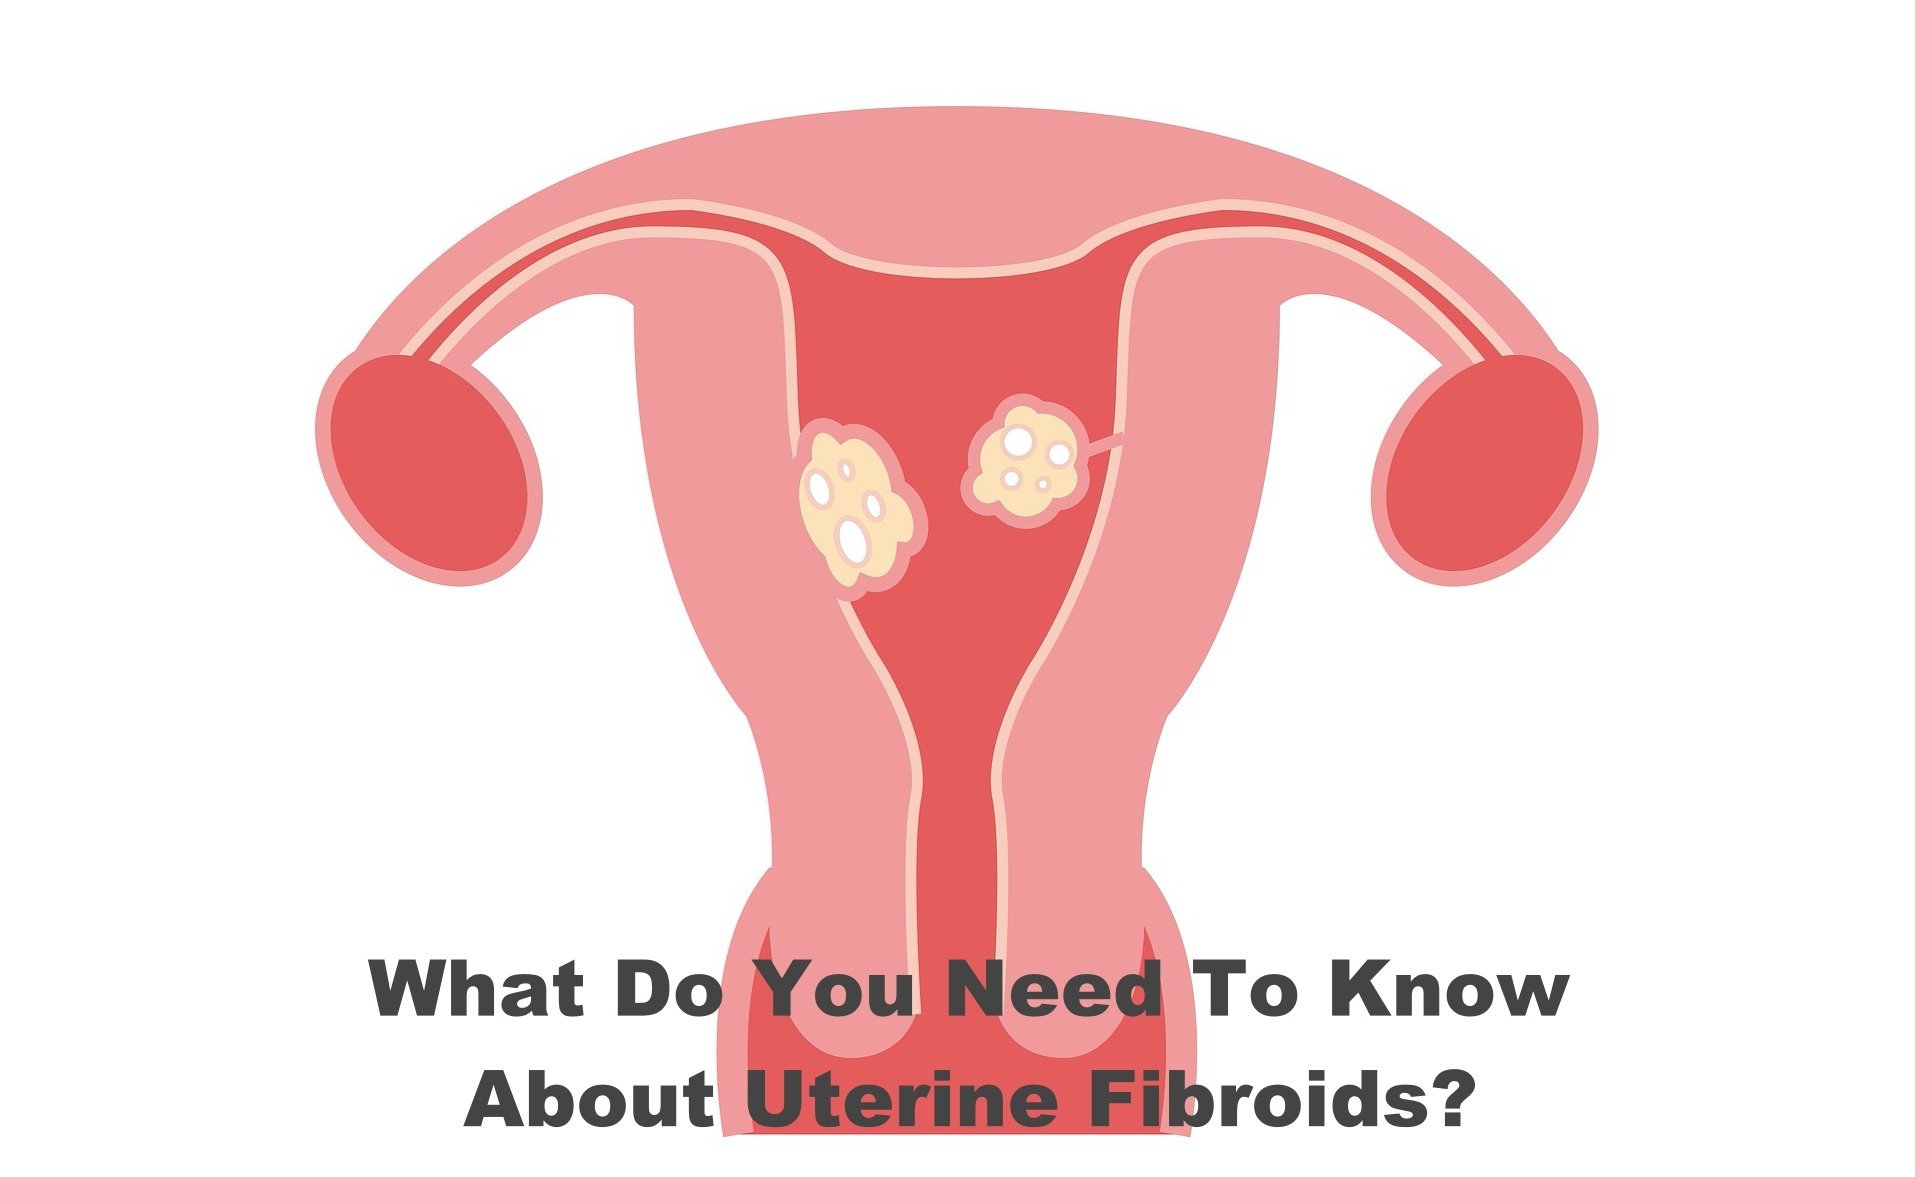 What Do You Need To Know About Uterine Fibroids?